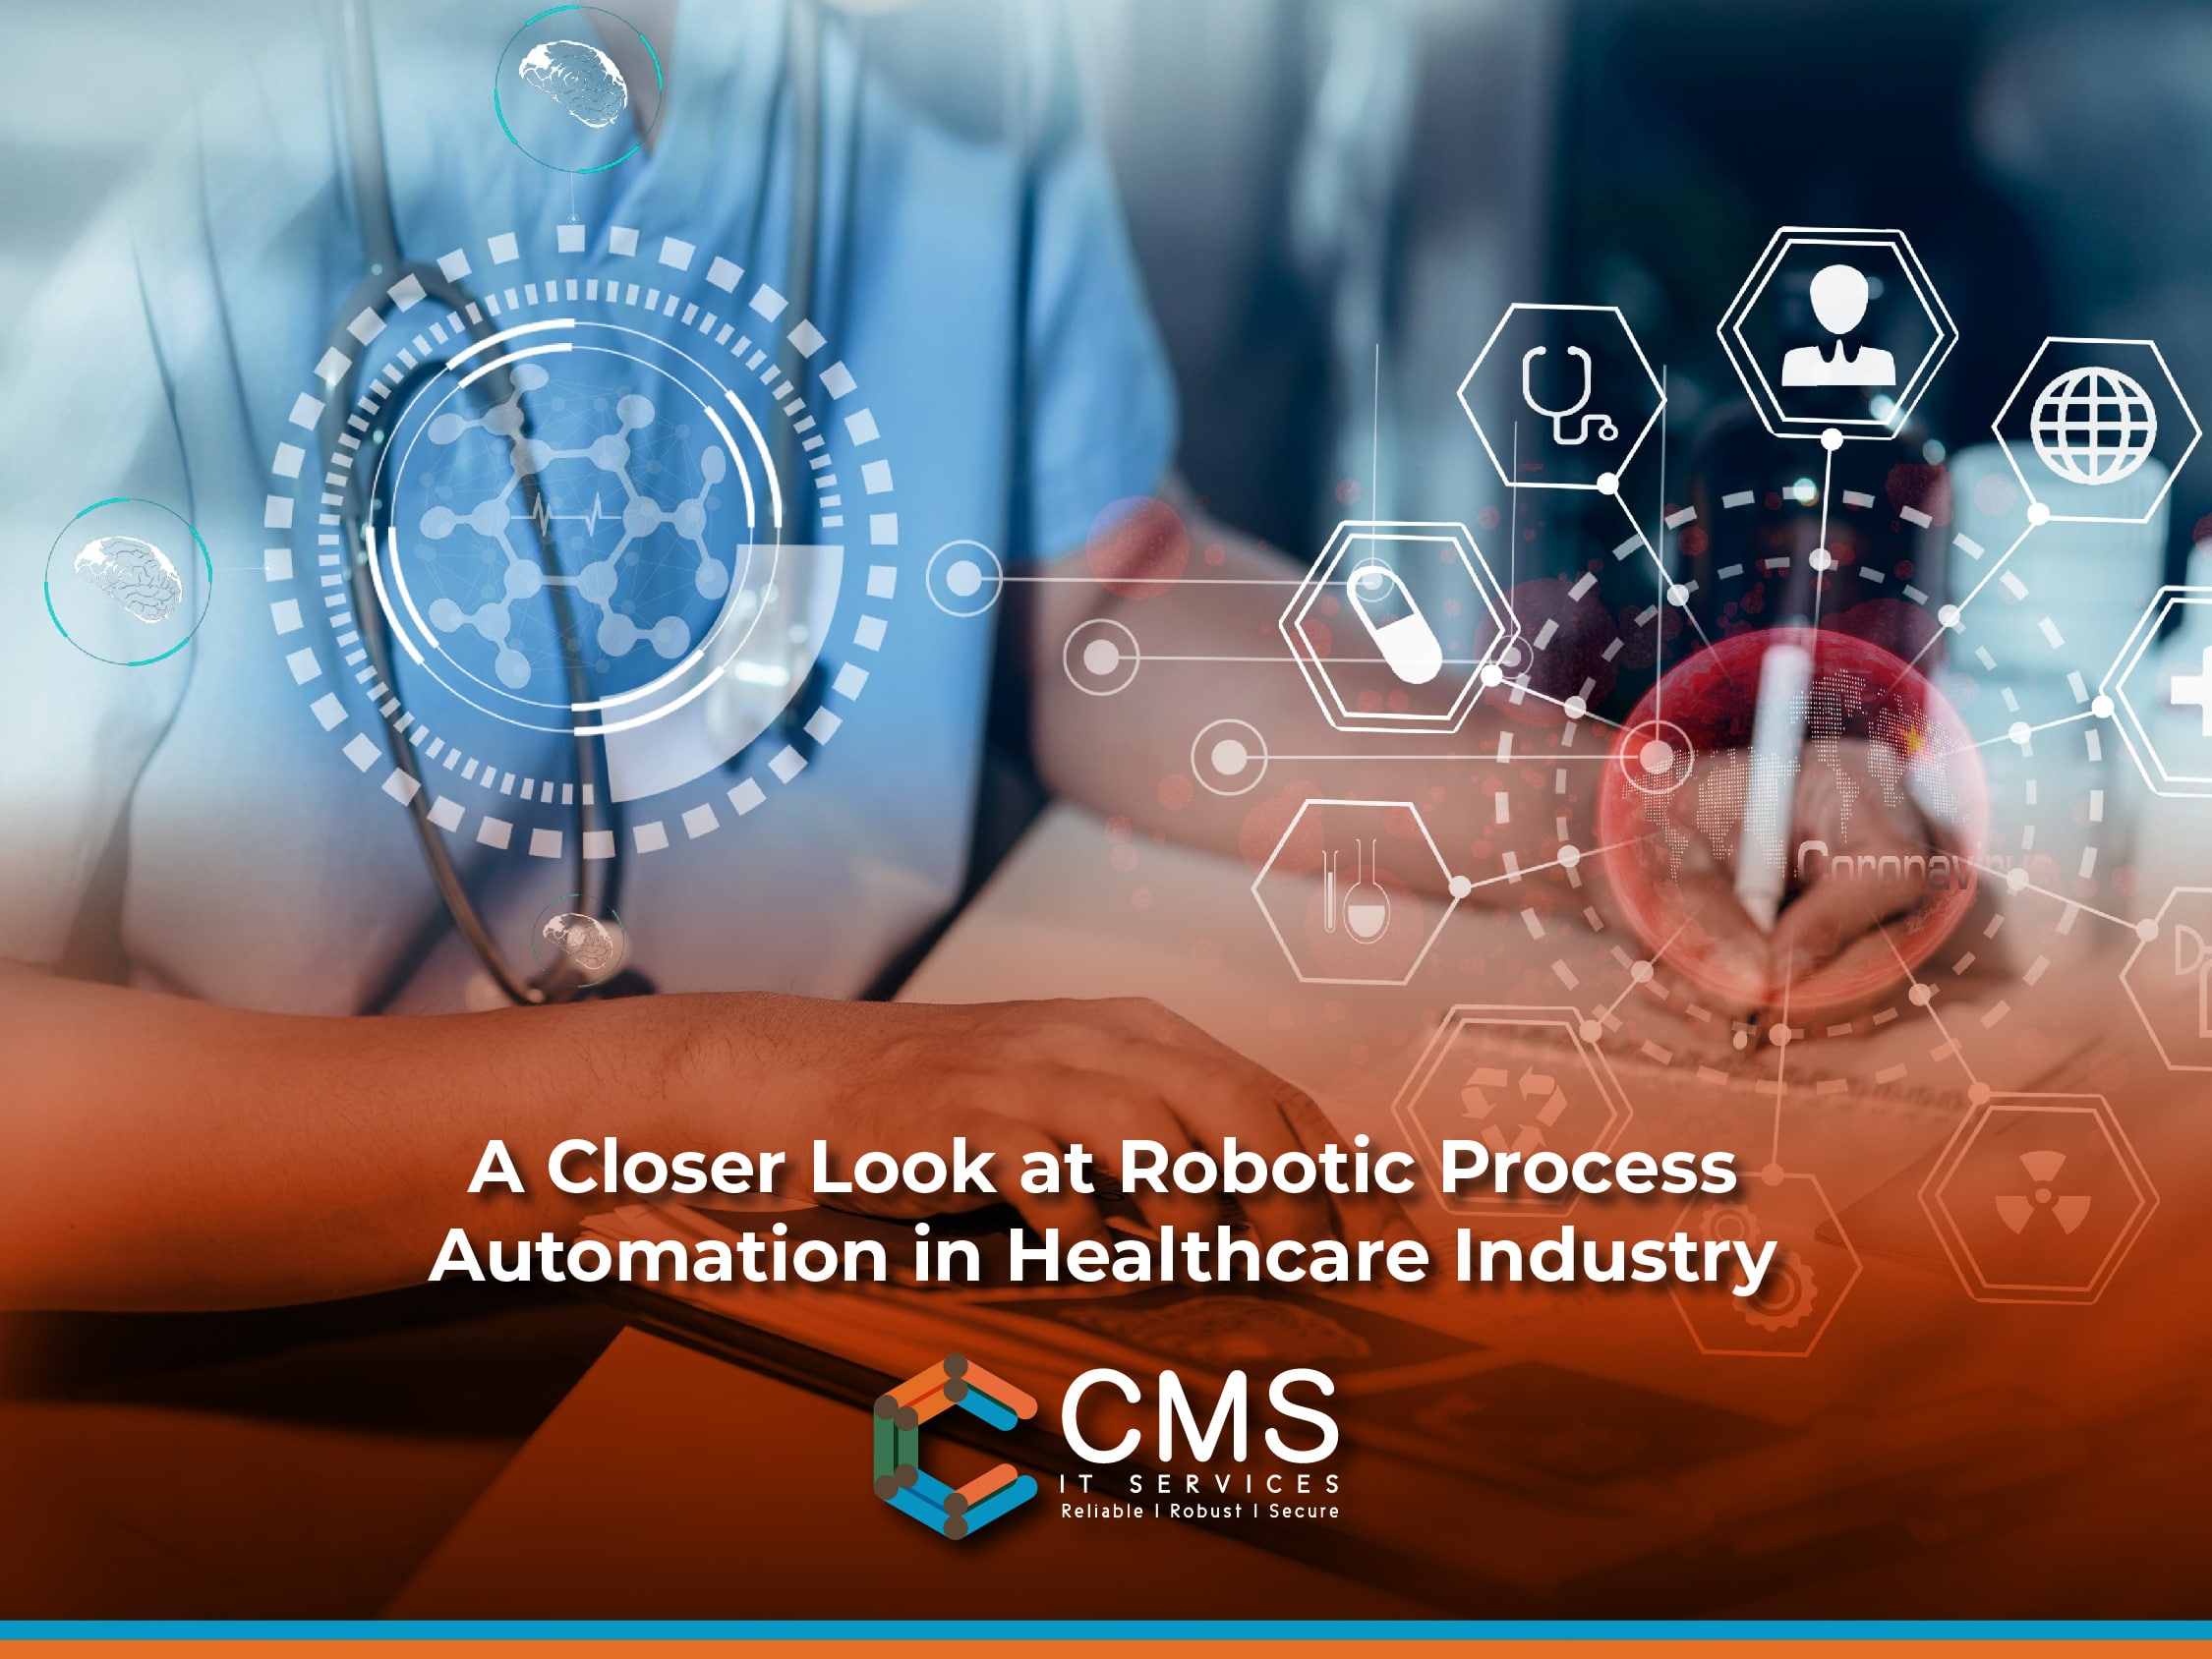 Robotic Process Automation in Healthcare Industry